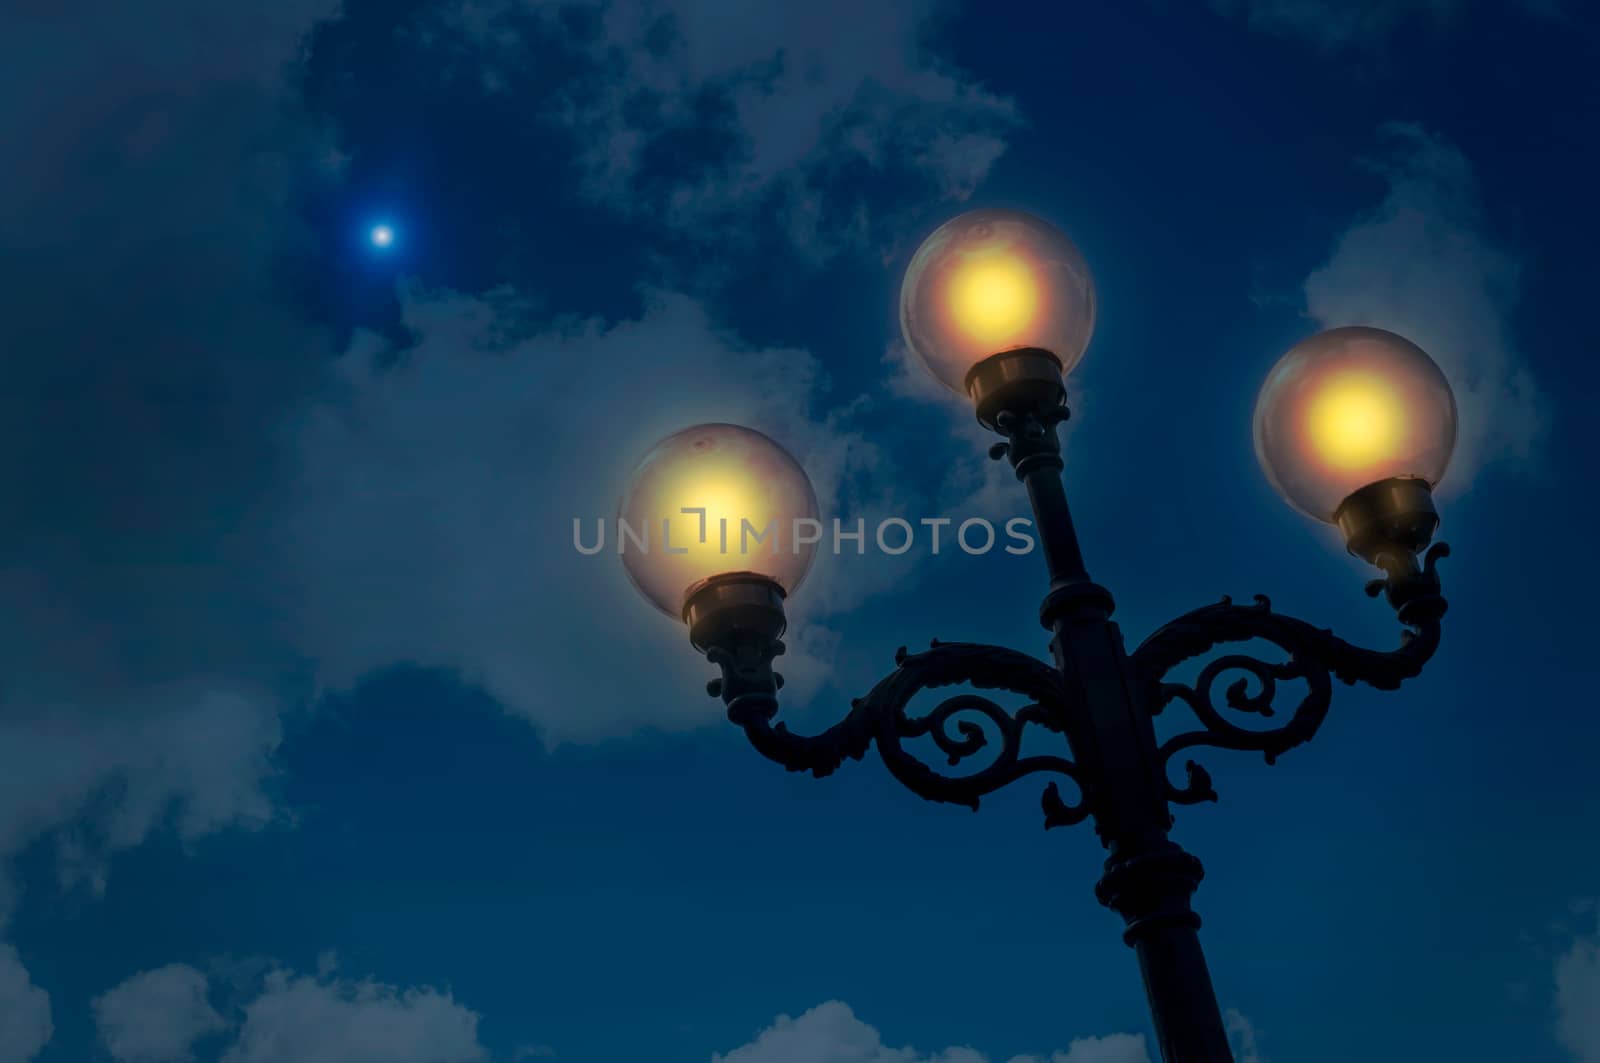 A lantern with three lamps illuminates a starry and cloudy night